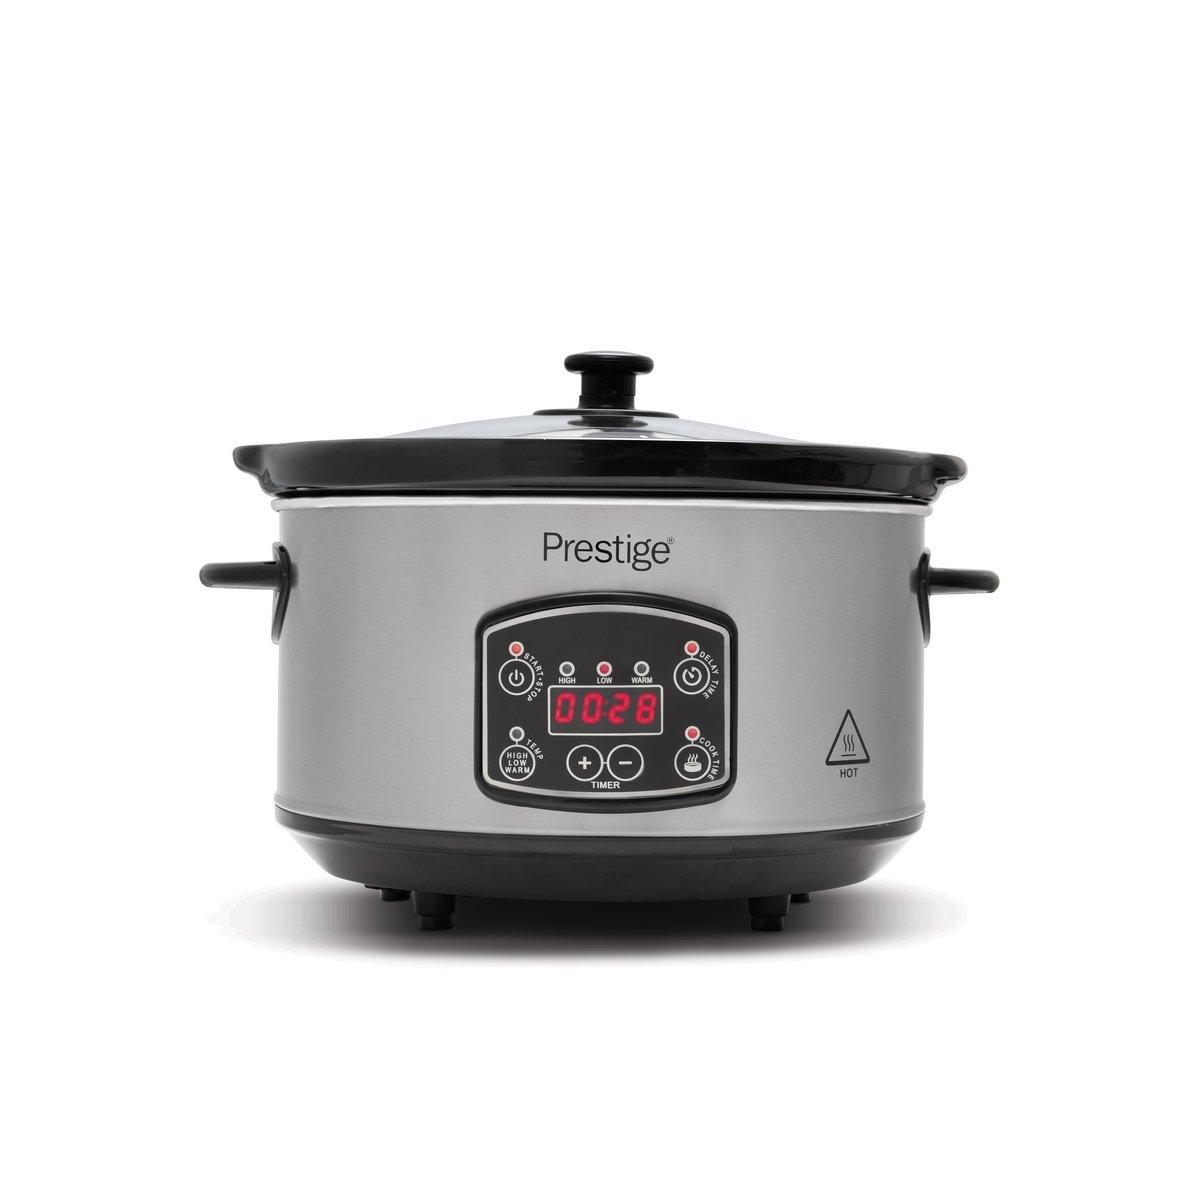 Slow Cooker' Stainless Steel Digital Slow Cooker - 5.5L